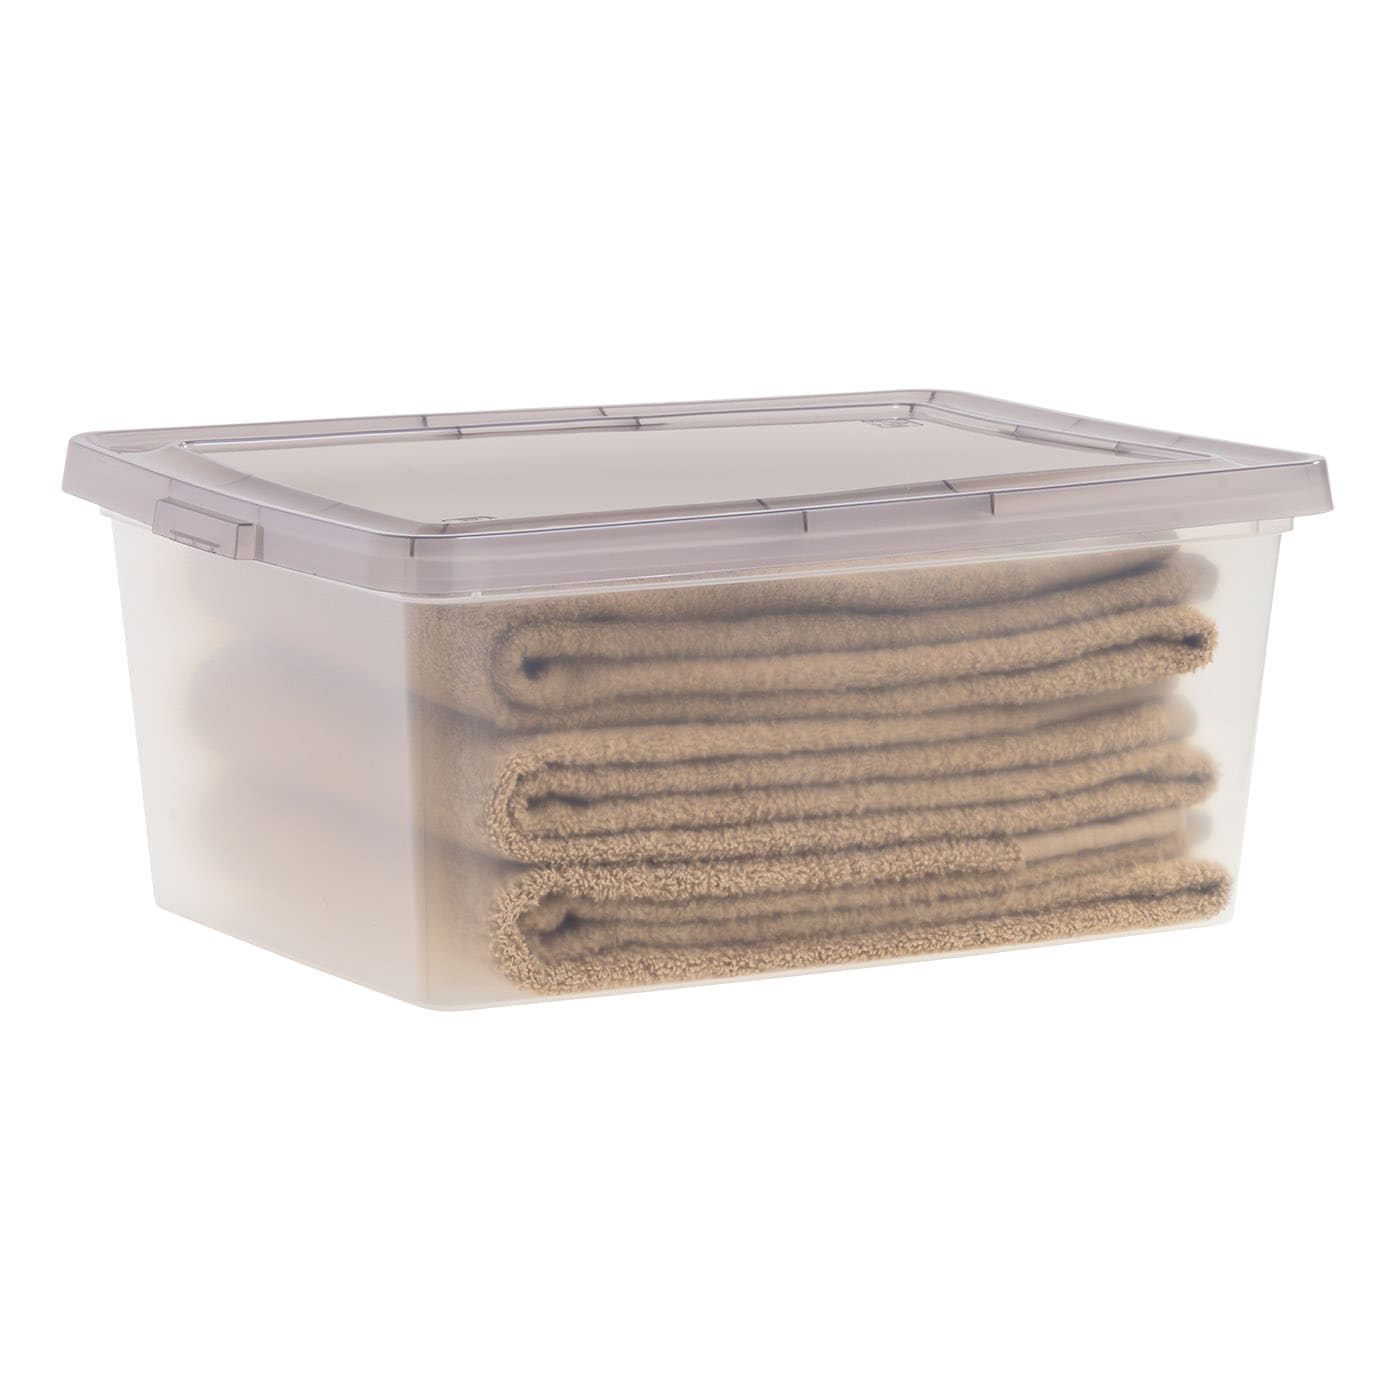 Iris USA, Plastic File Box, Gray Body, Clear Lid, Pack of 3